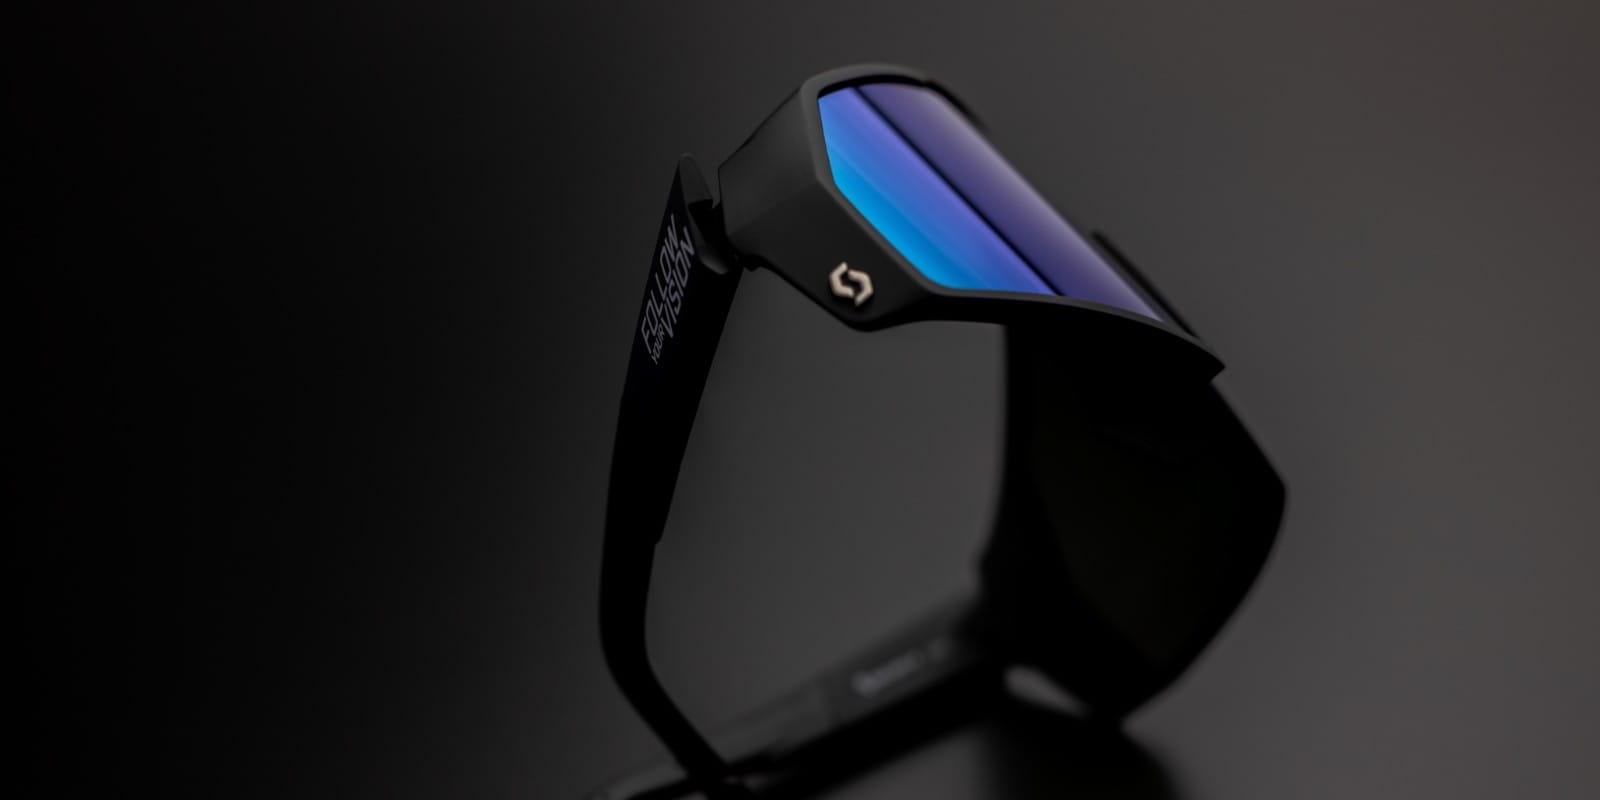 SCOTT Pro shield follow your vision sunglasses beauty shot, on a grey background, showing a blue to violet reflect on the lens